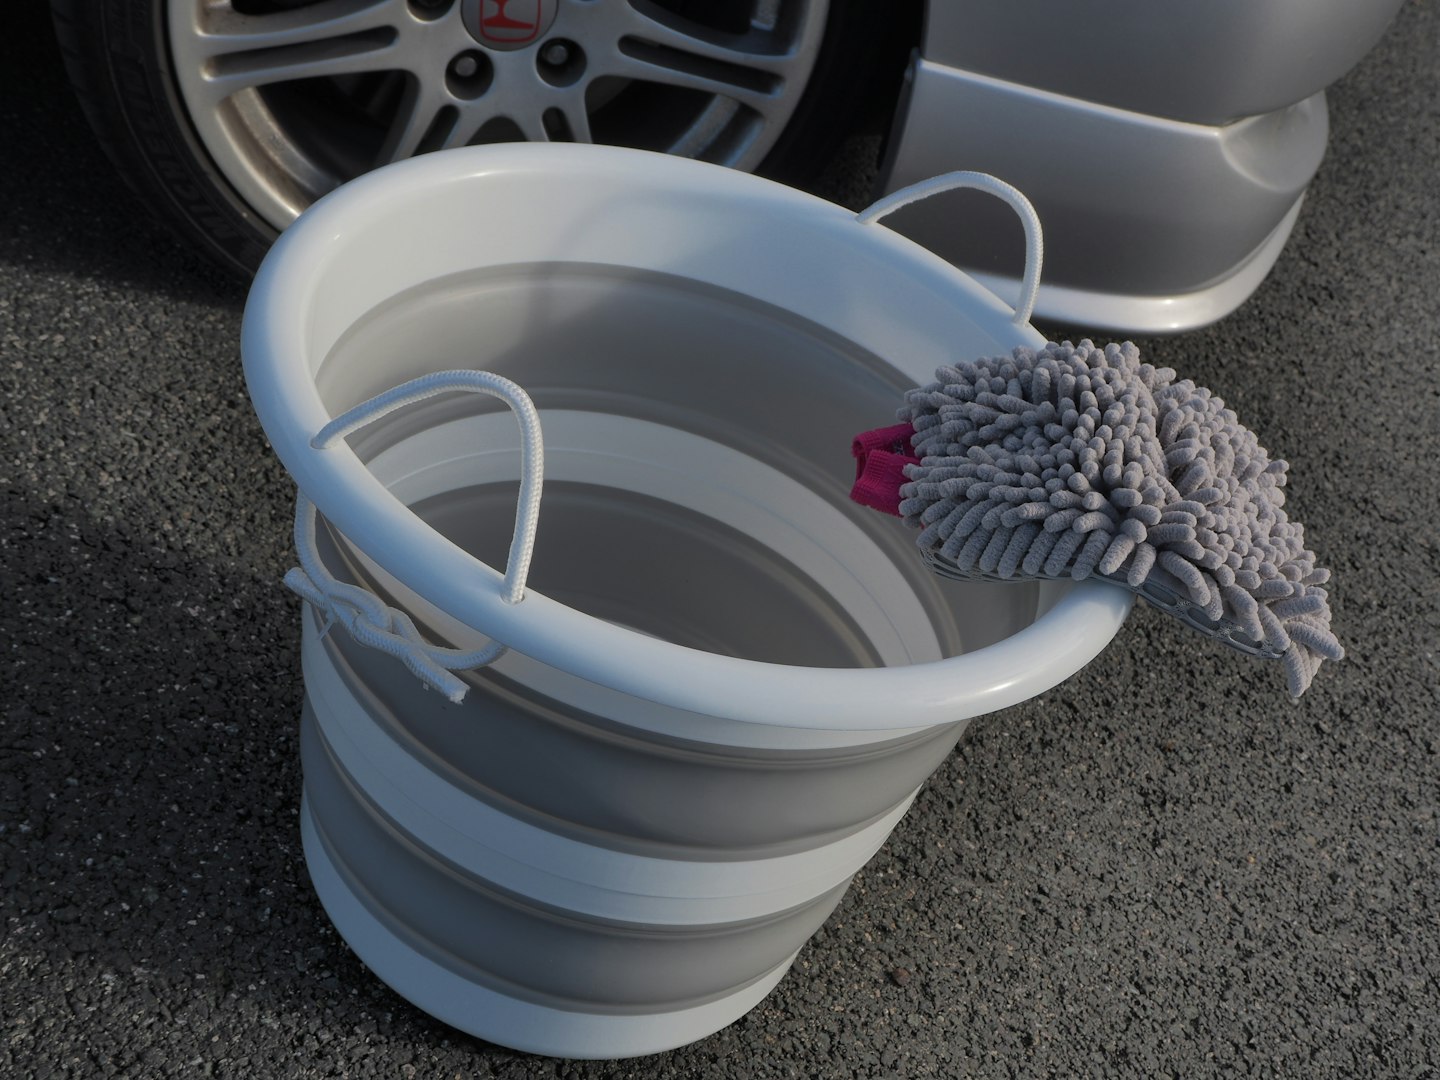 The collapsing bucket next to a car